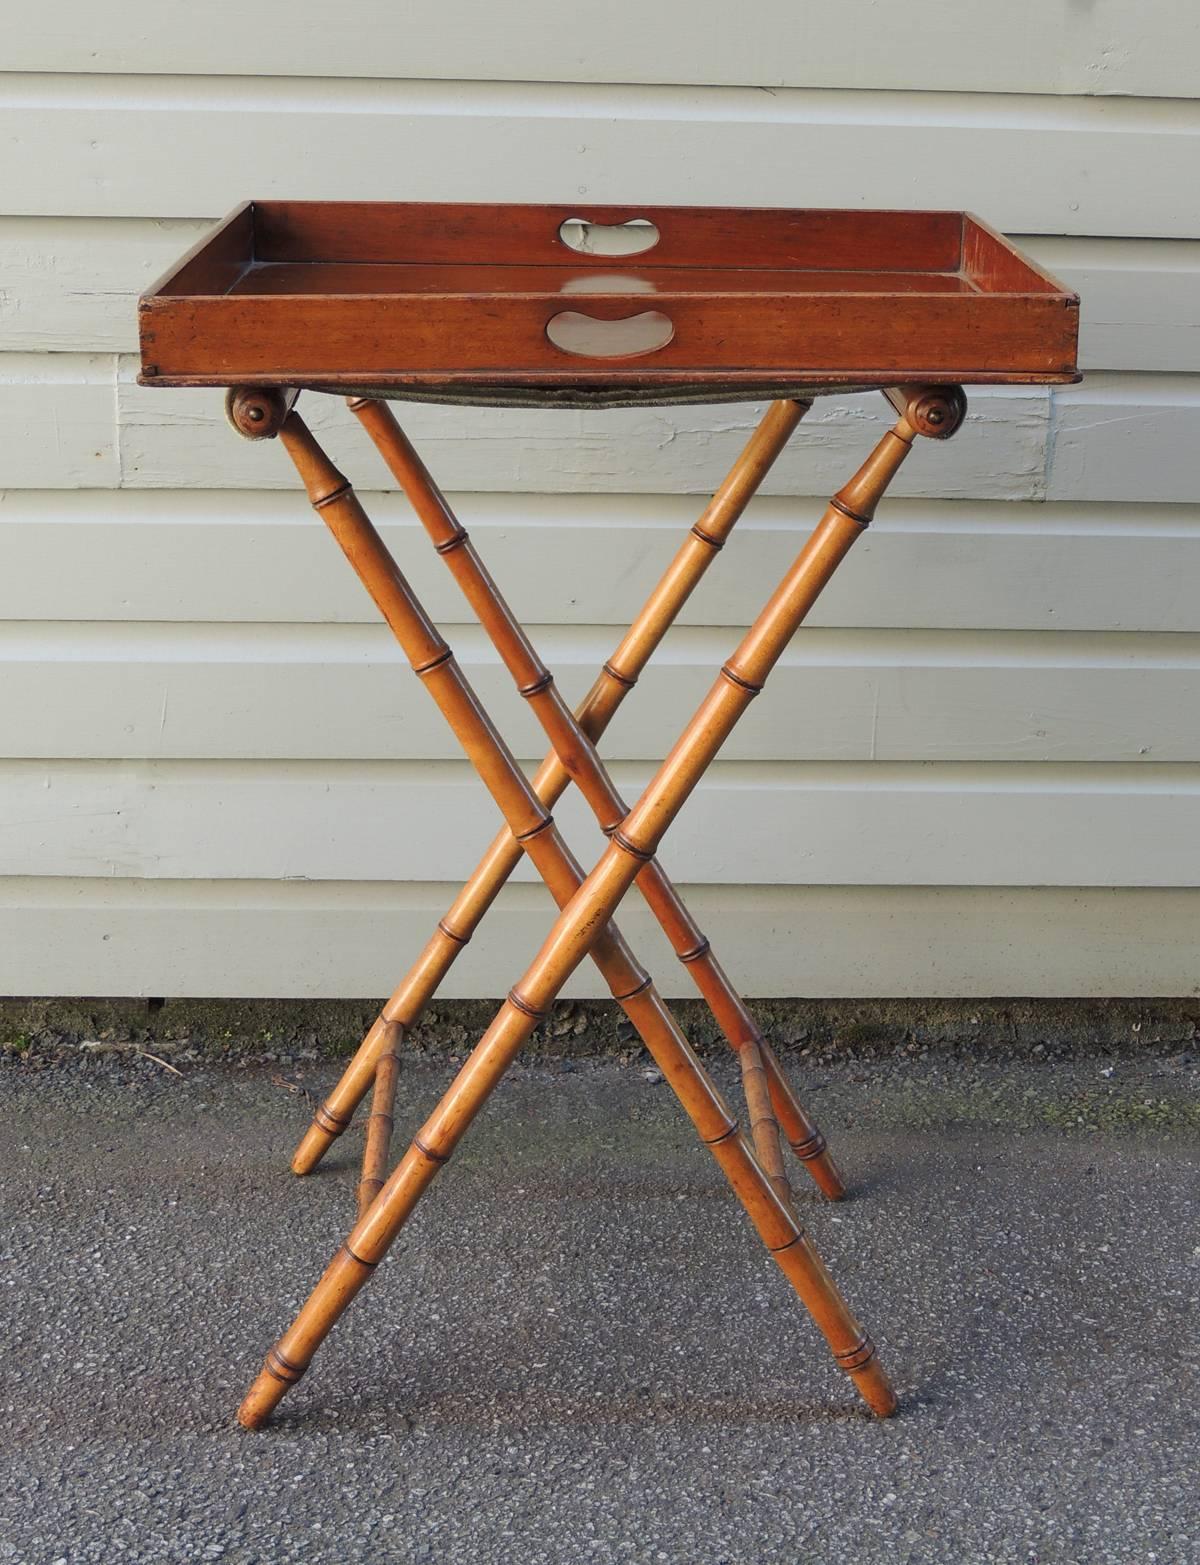 European 19th C English Regency Butlers Tray Table with Faux Bamboo Legs